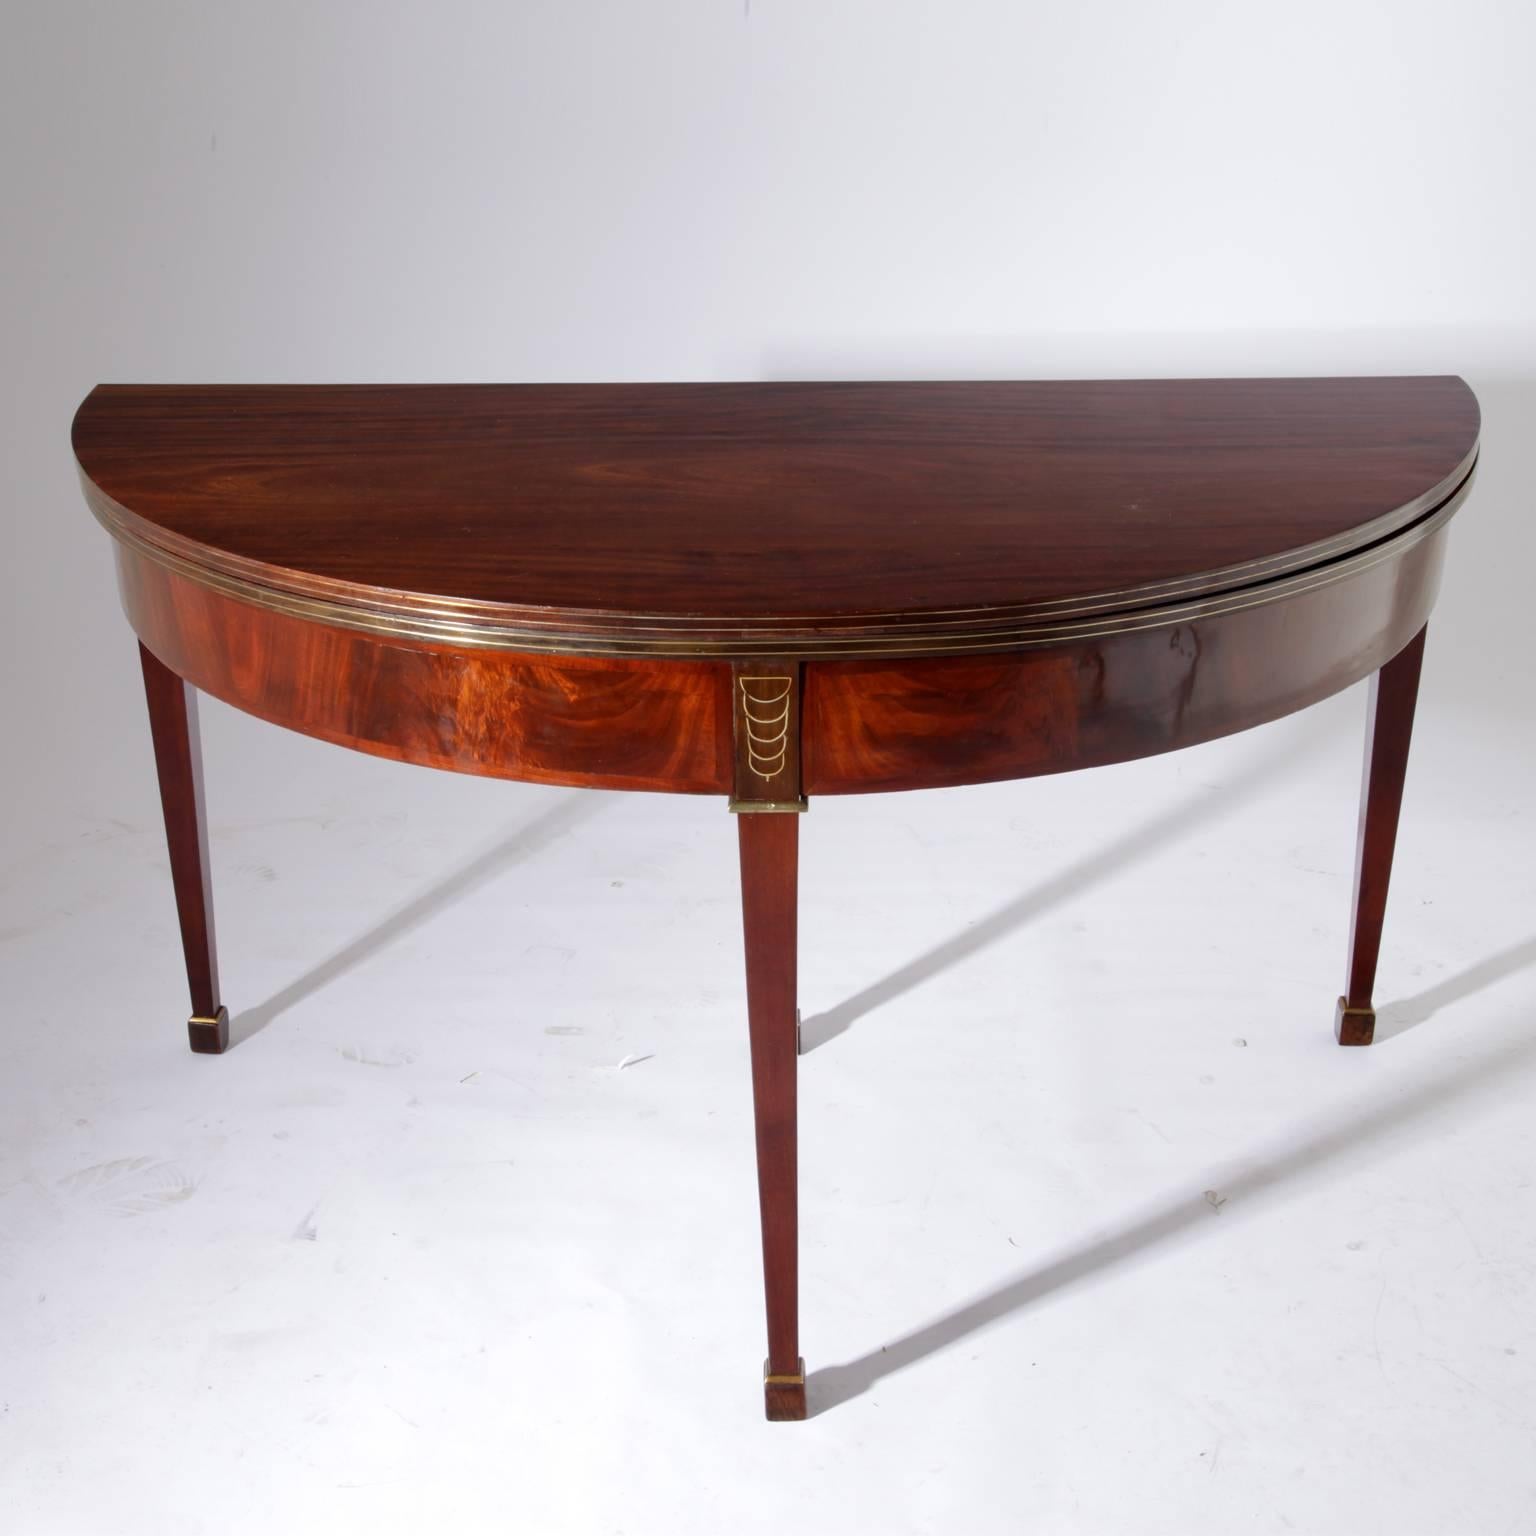 Demilune table by Jean-Joseph Chapuis on tapered legs with sickle-shaped brass inlays and a very beautiful mahogany veneer. The rear leg can be pulled out and is stamped 